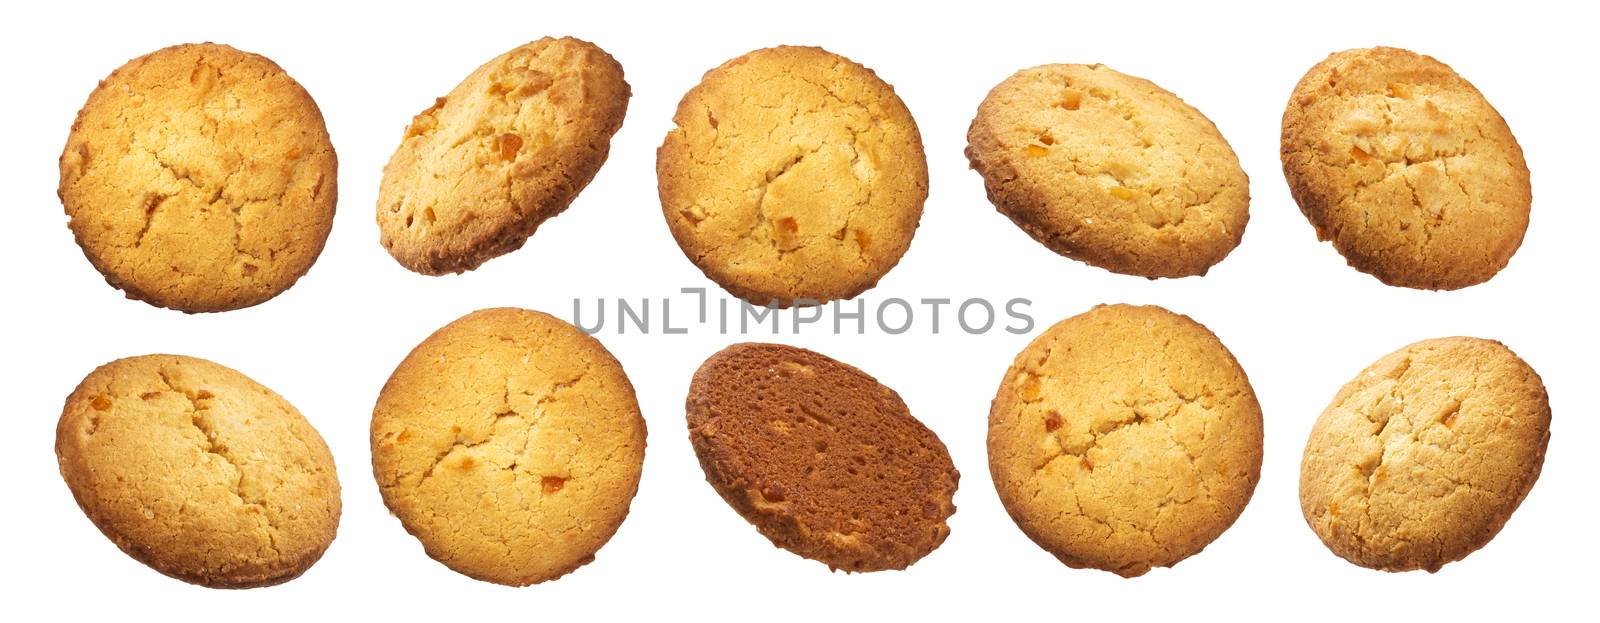 Oatmeal cookies isolated on white background with clipping path. Collection